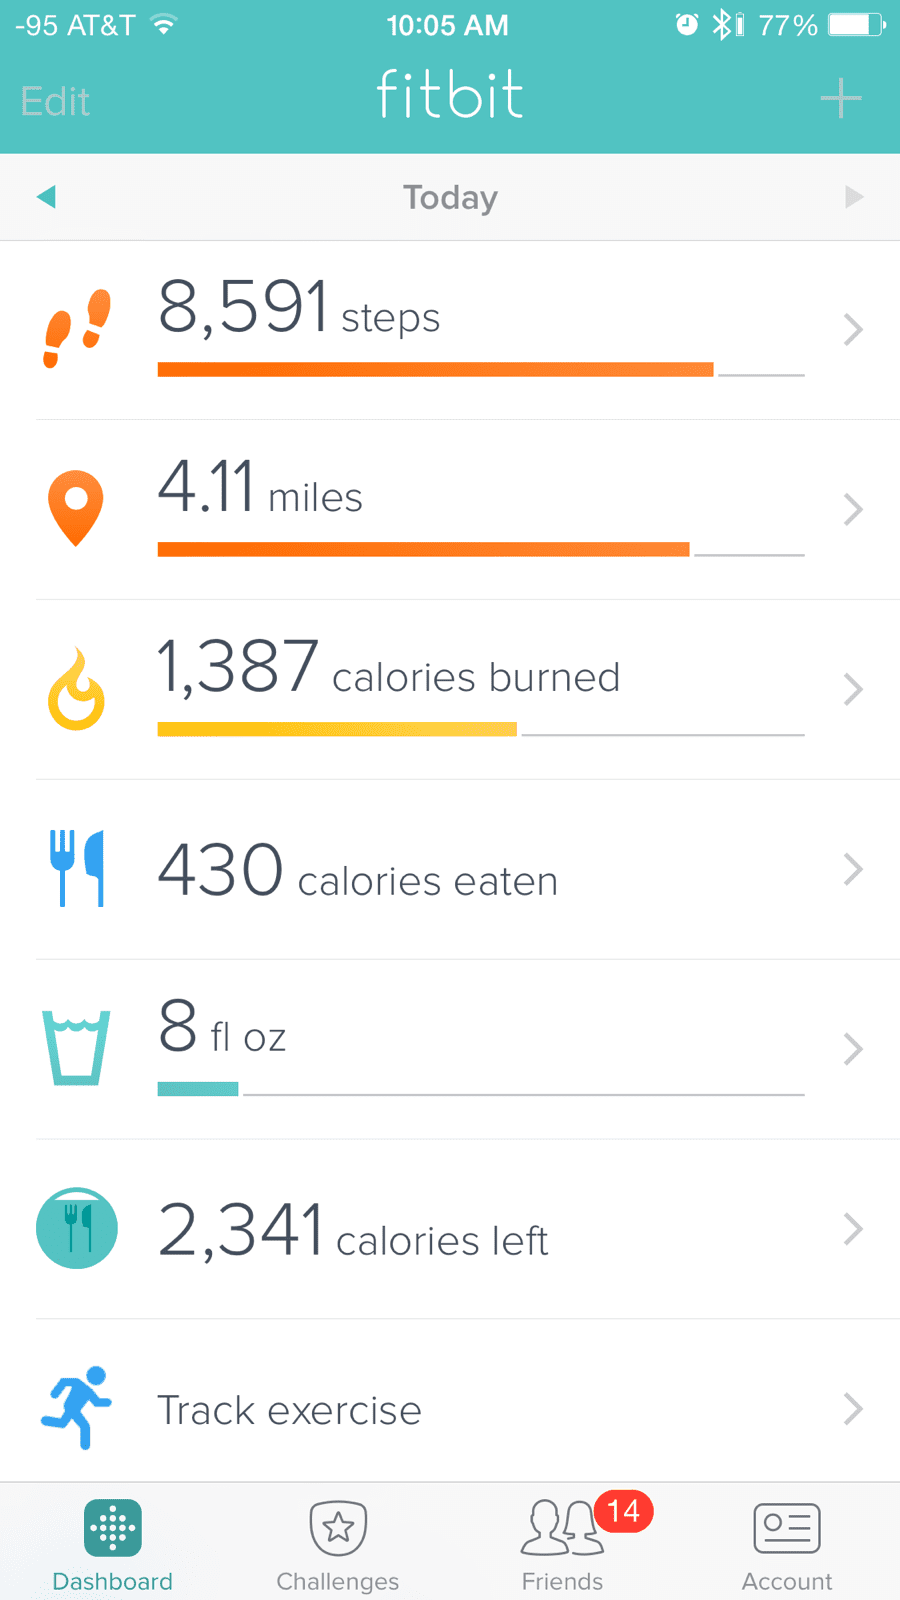 Almost 9,000 steps by 10 AM!